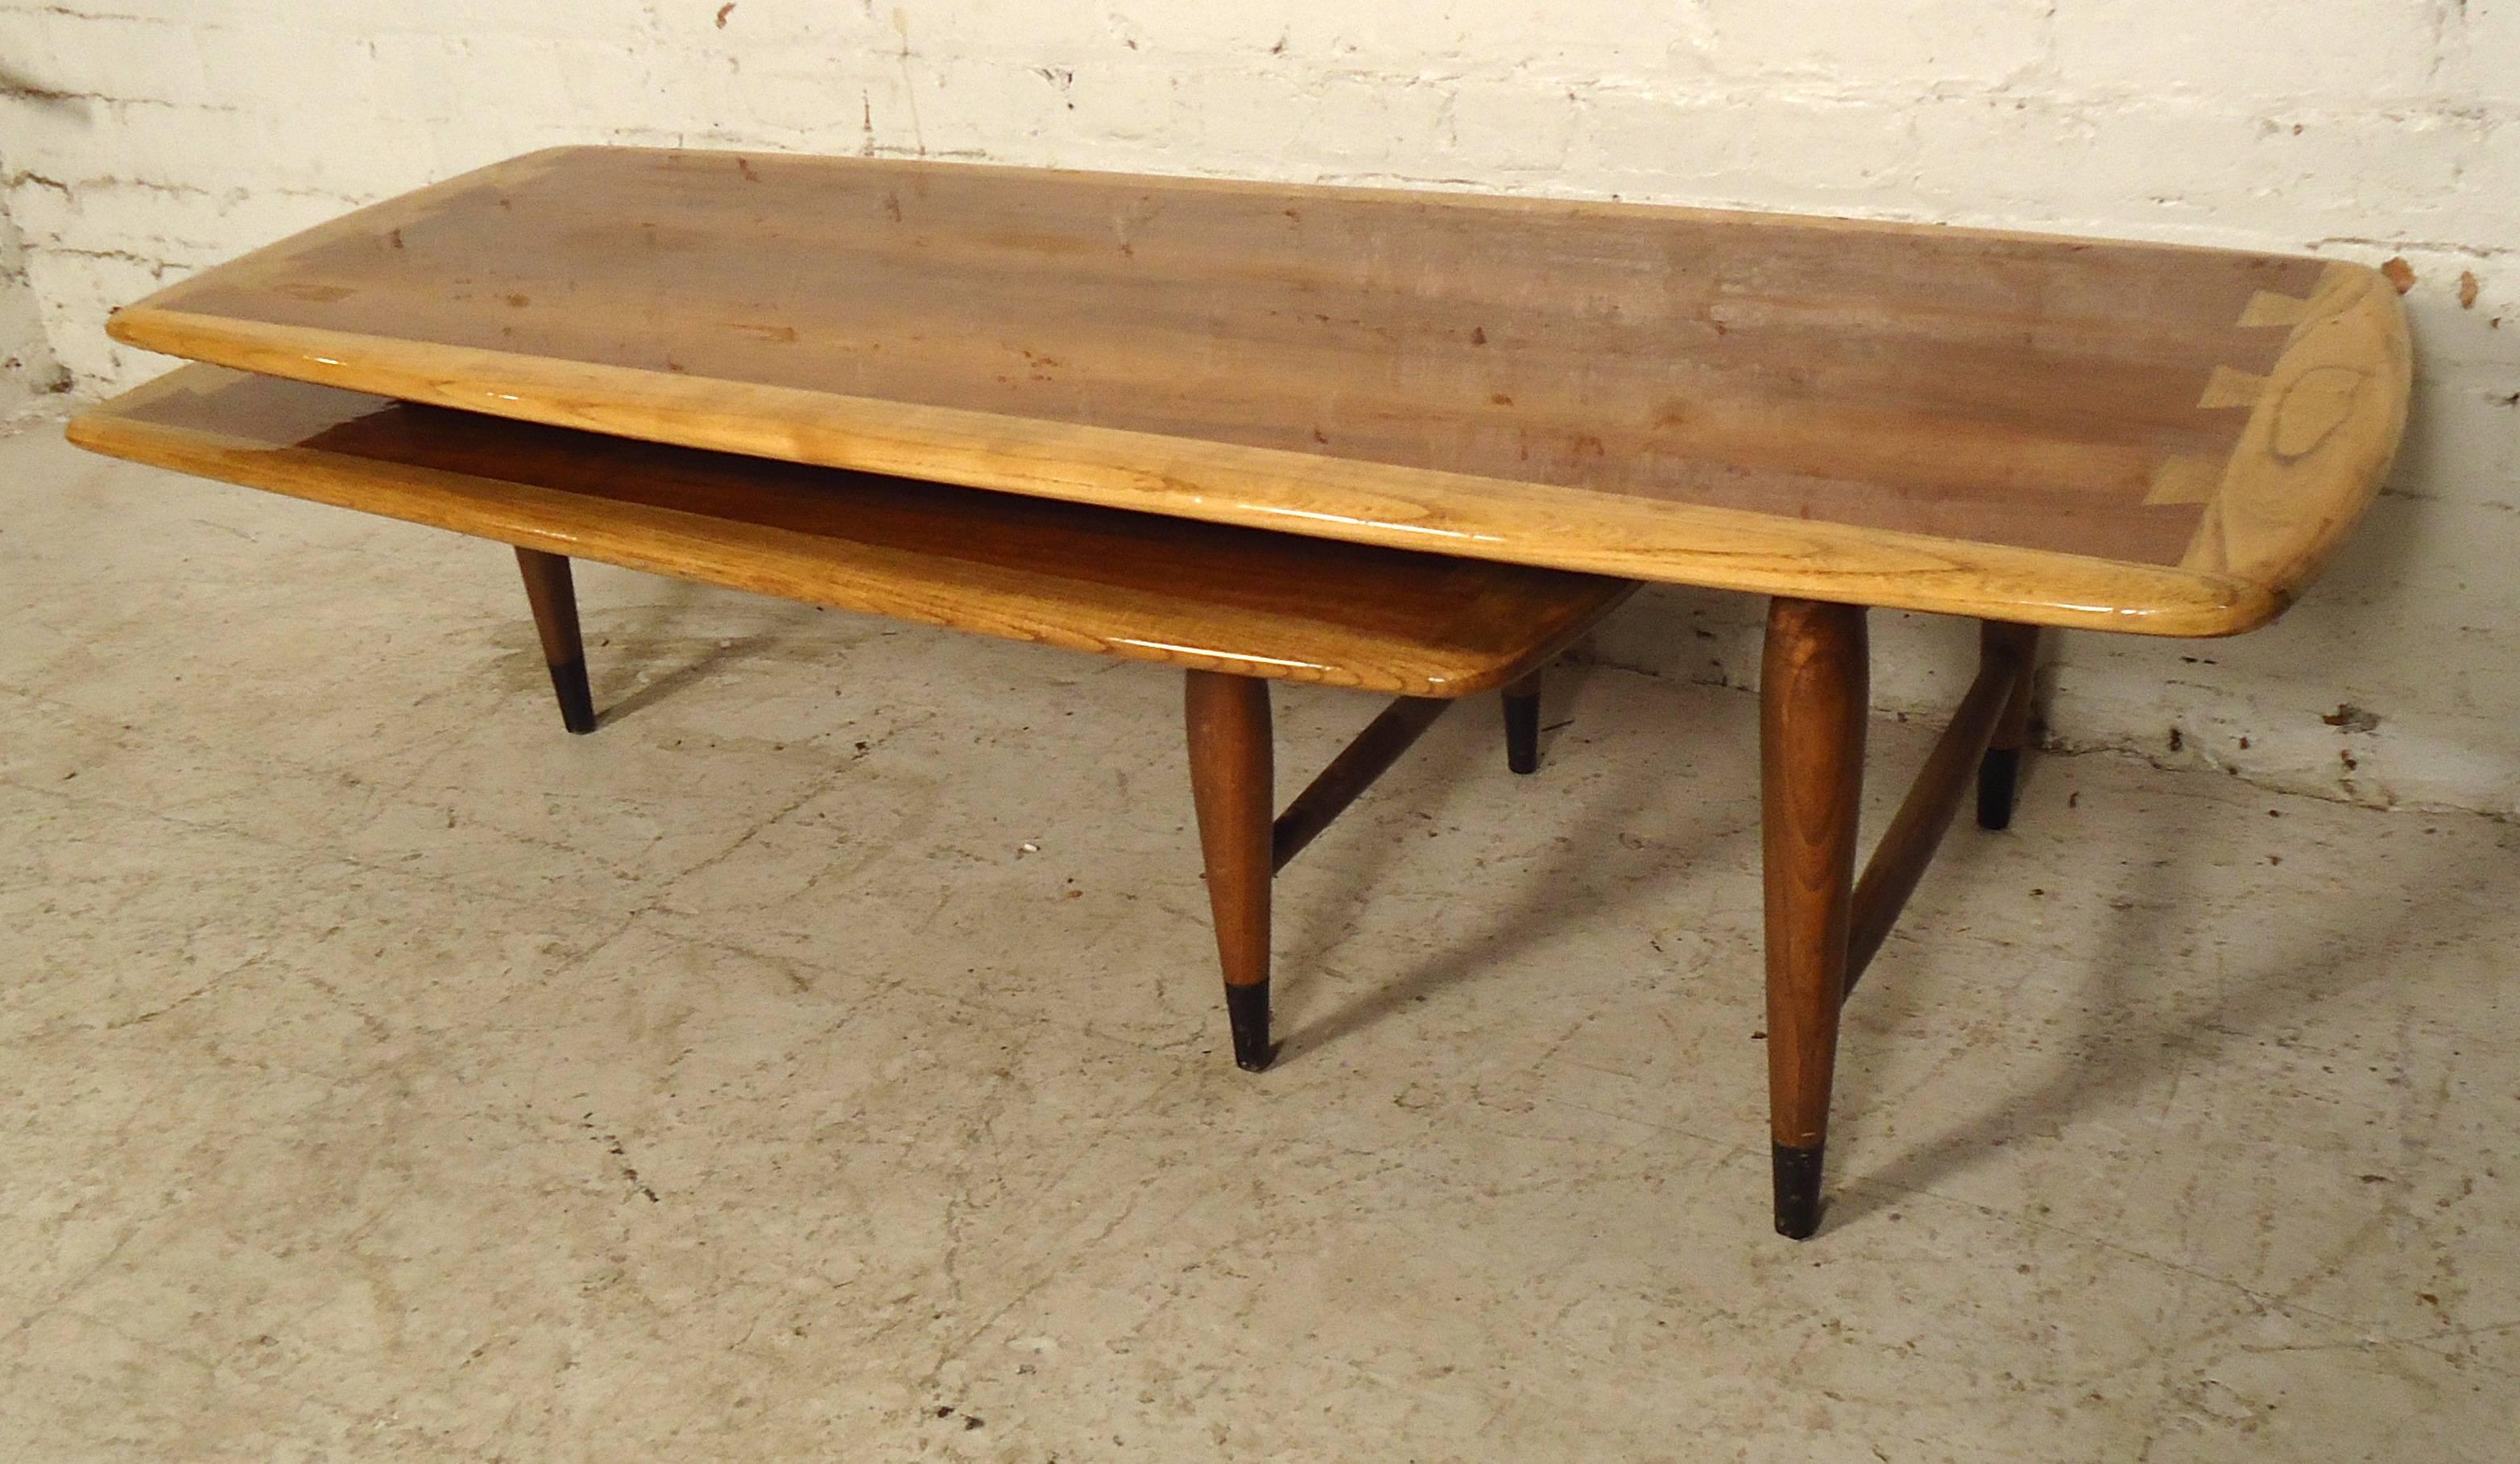 Beautiful vintage modern two-tier walnut coffee table features a thick lacquer, dovetail inlay, five sturdy legs, and a pull-out bottom tier easy to position to your preference.

(Please confirm item location NY or NJ, with dealer).